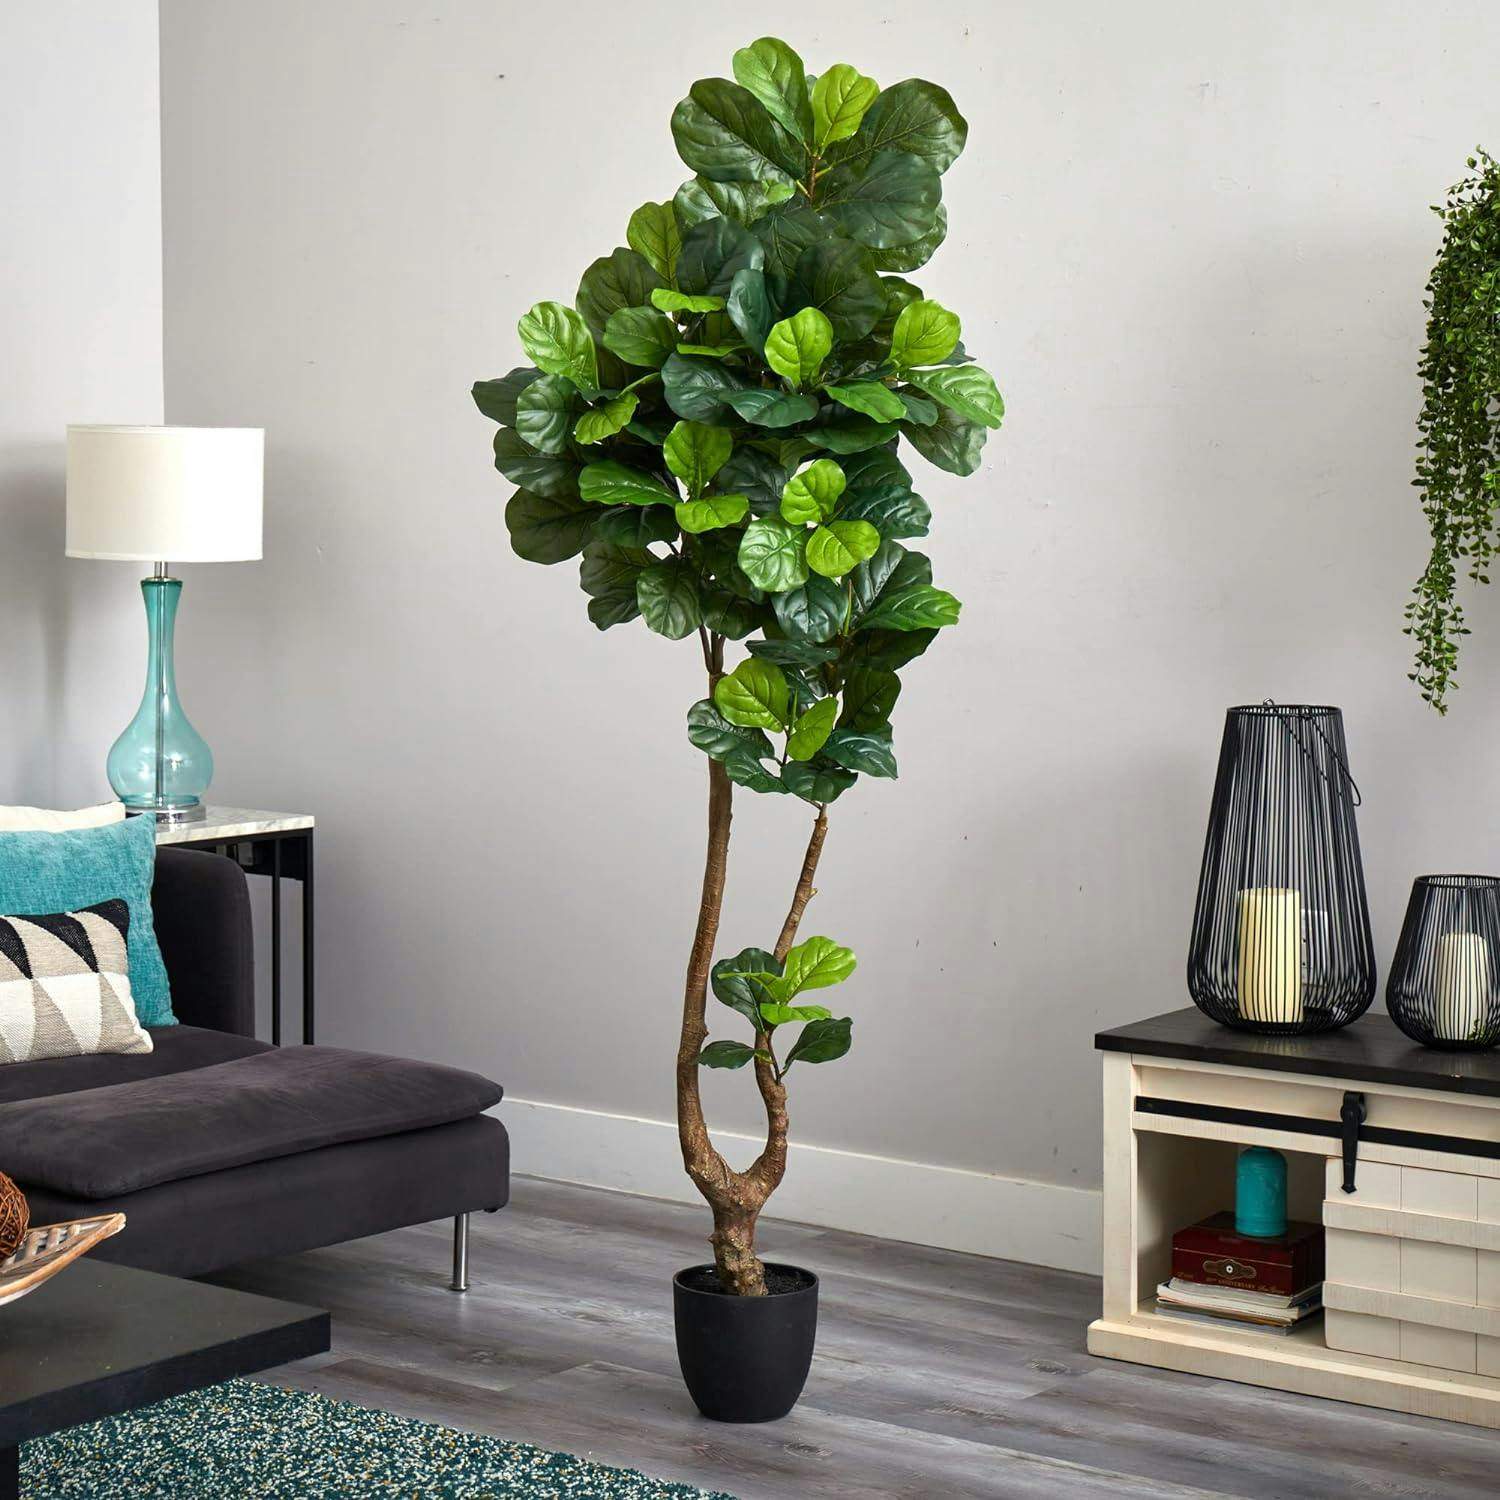 Lush Greenery 78'' Real-Touch Fiddle Leaf in Pot